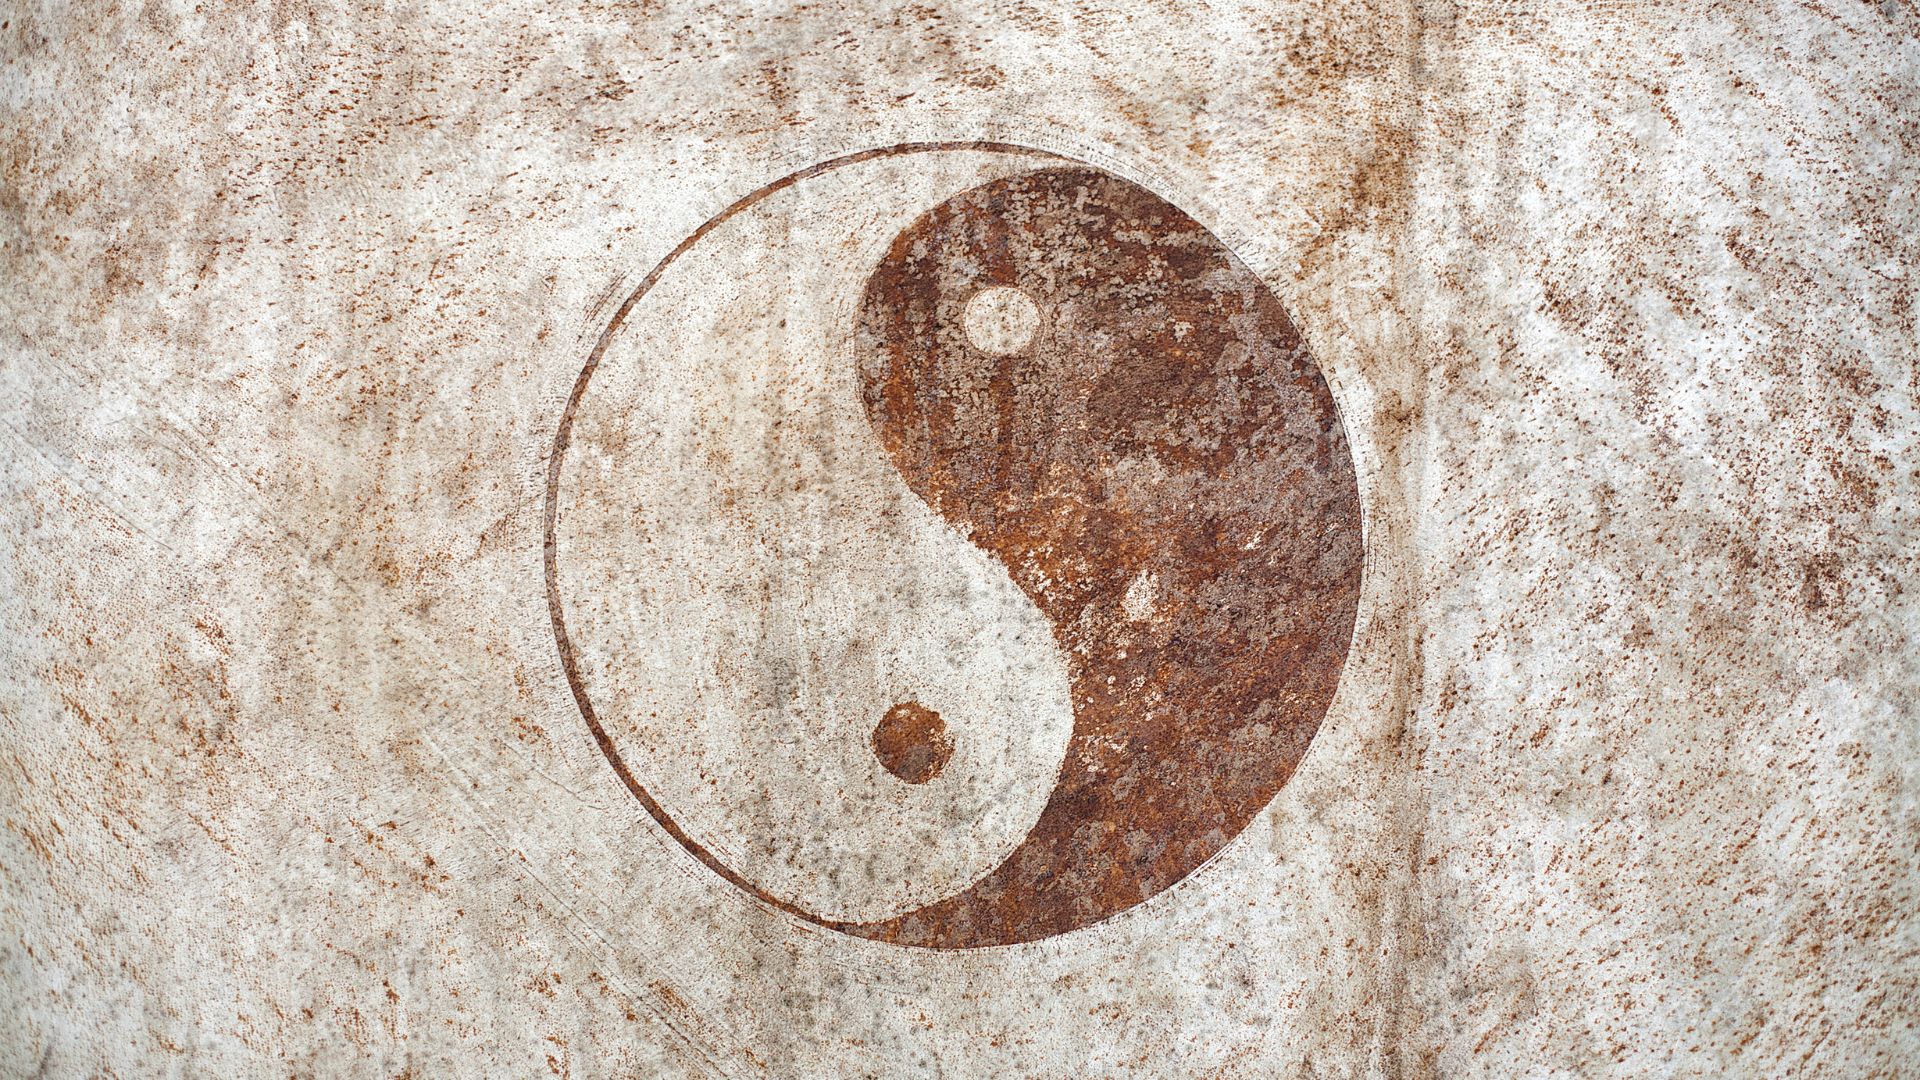 Yin Yang Meaning in Love: 4 Ways to Balance Your Relationship